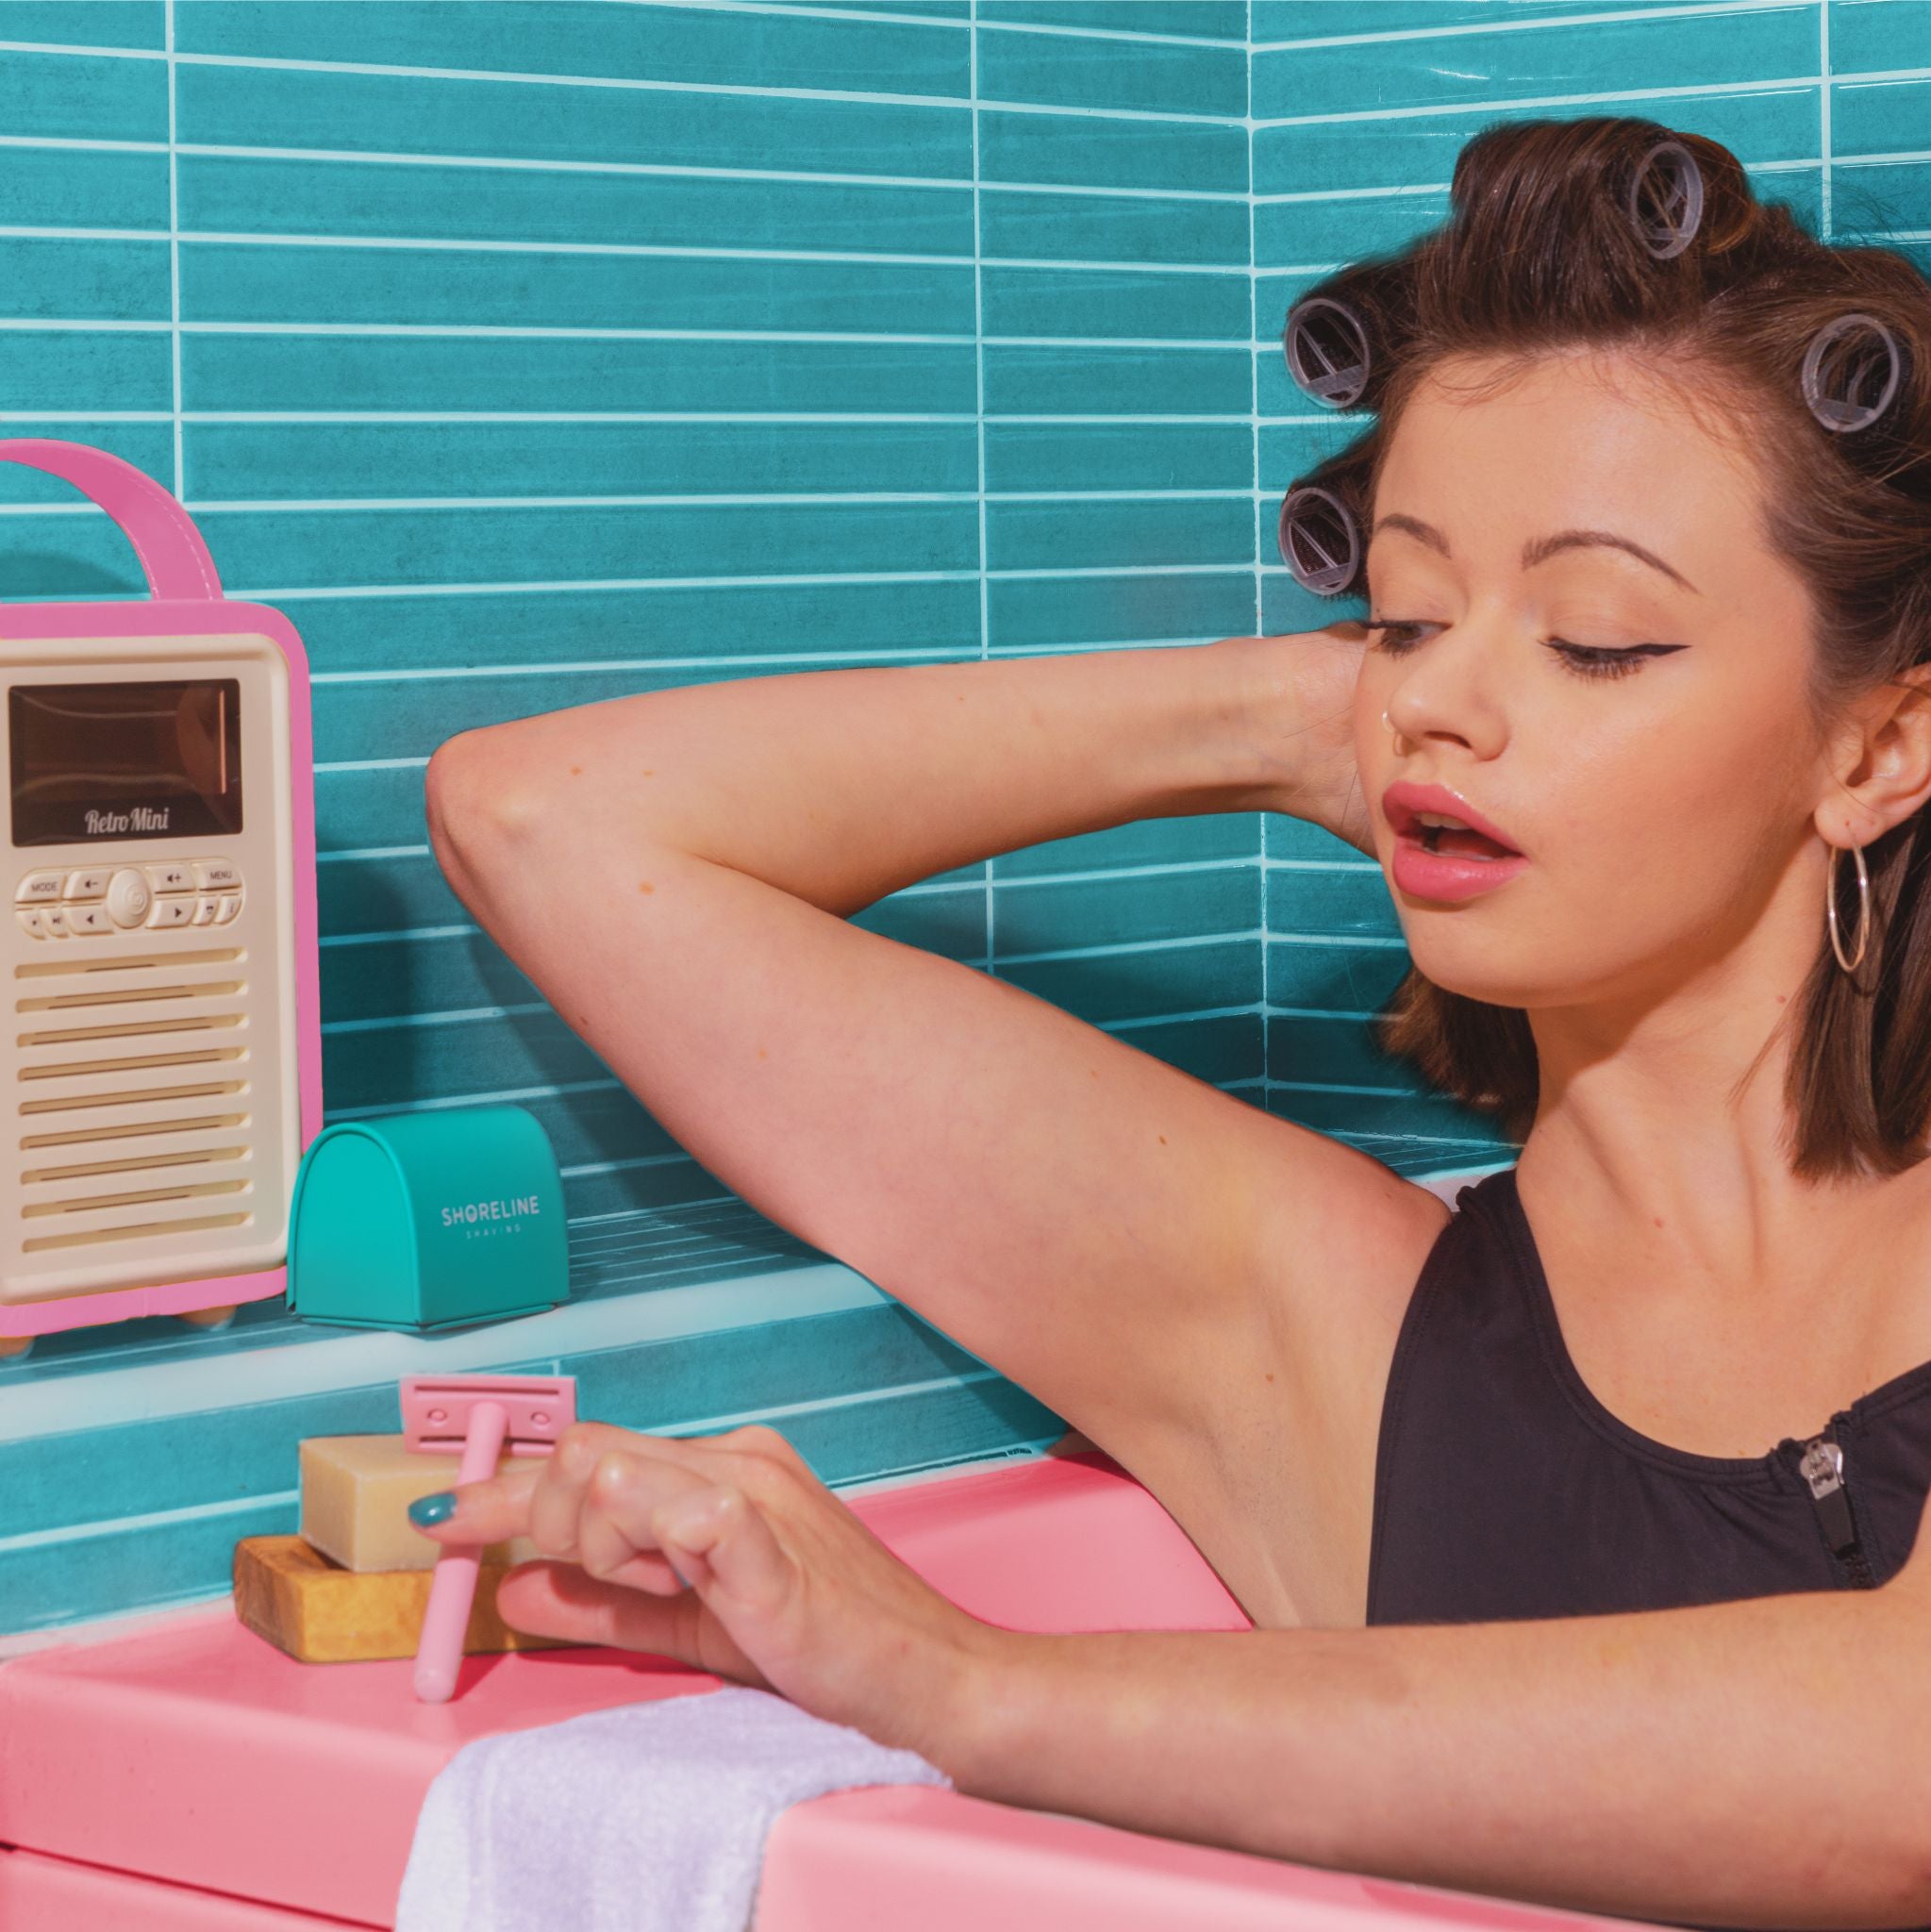 A women with her hair in rollers shaving with a safety razor from an ultimate shaving kit gift set - Shoreline Shaving